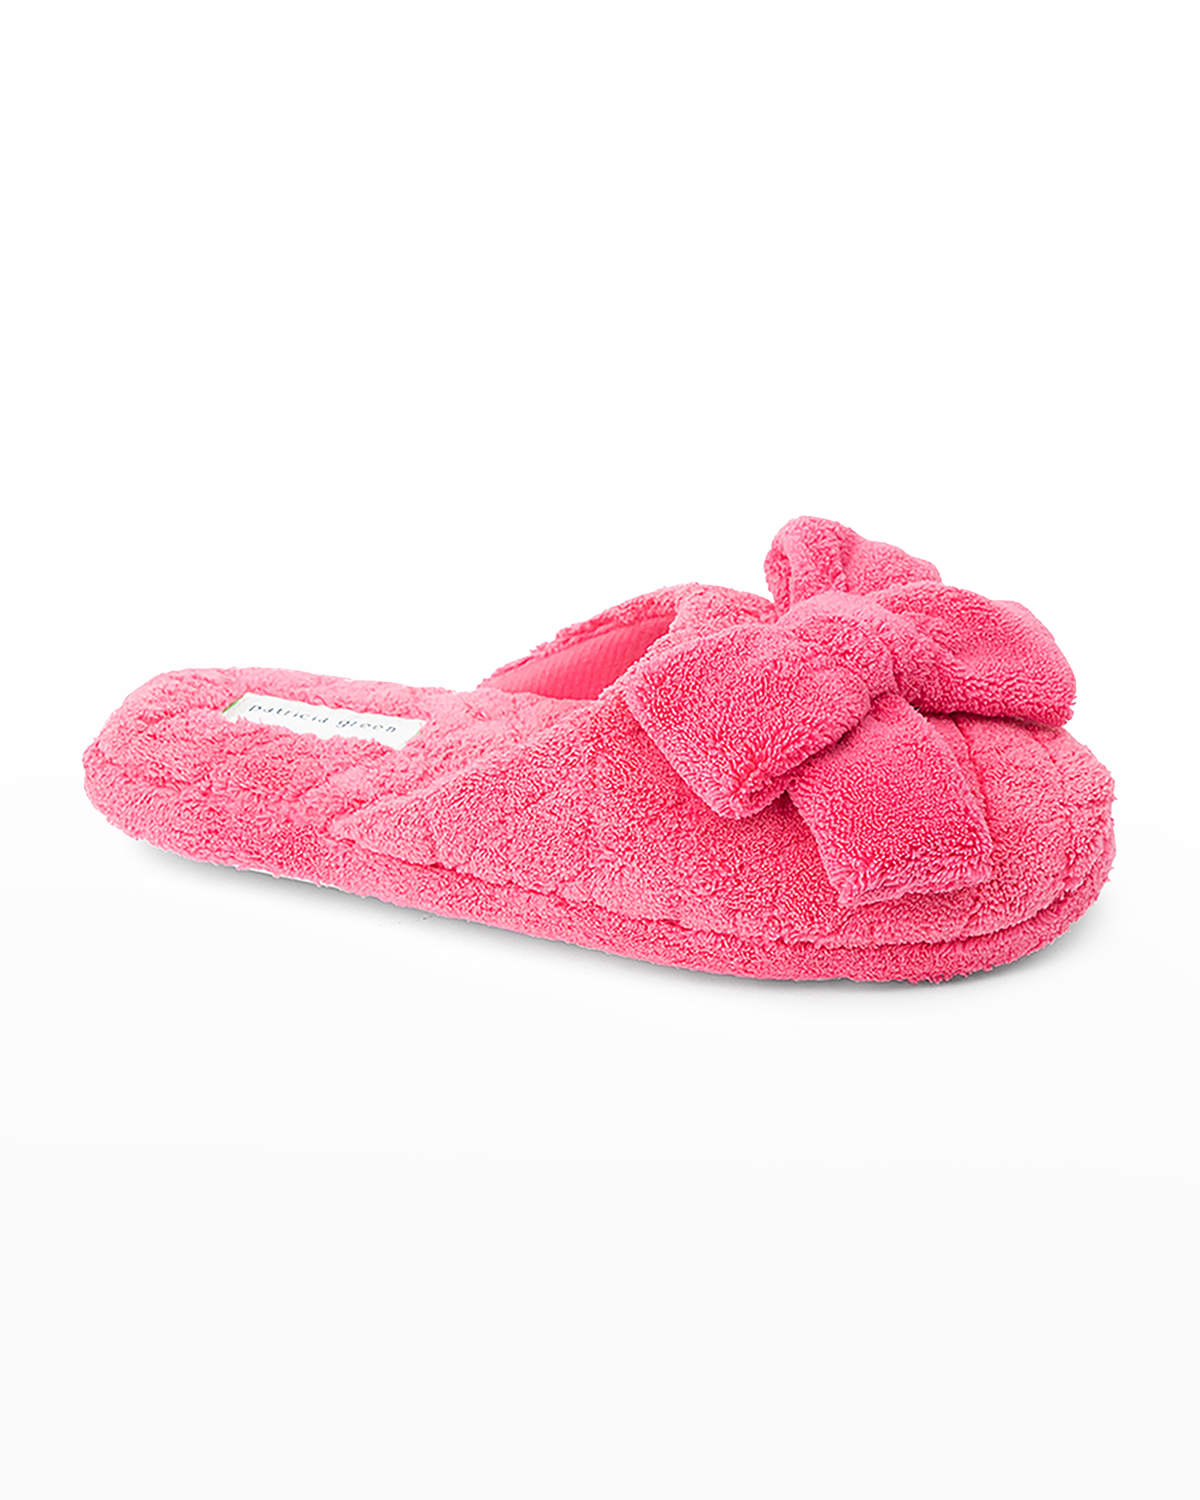 PATRICIA GREEN BONNIE MICROTERRY SLIPPERS,PROD238850276